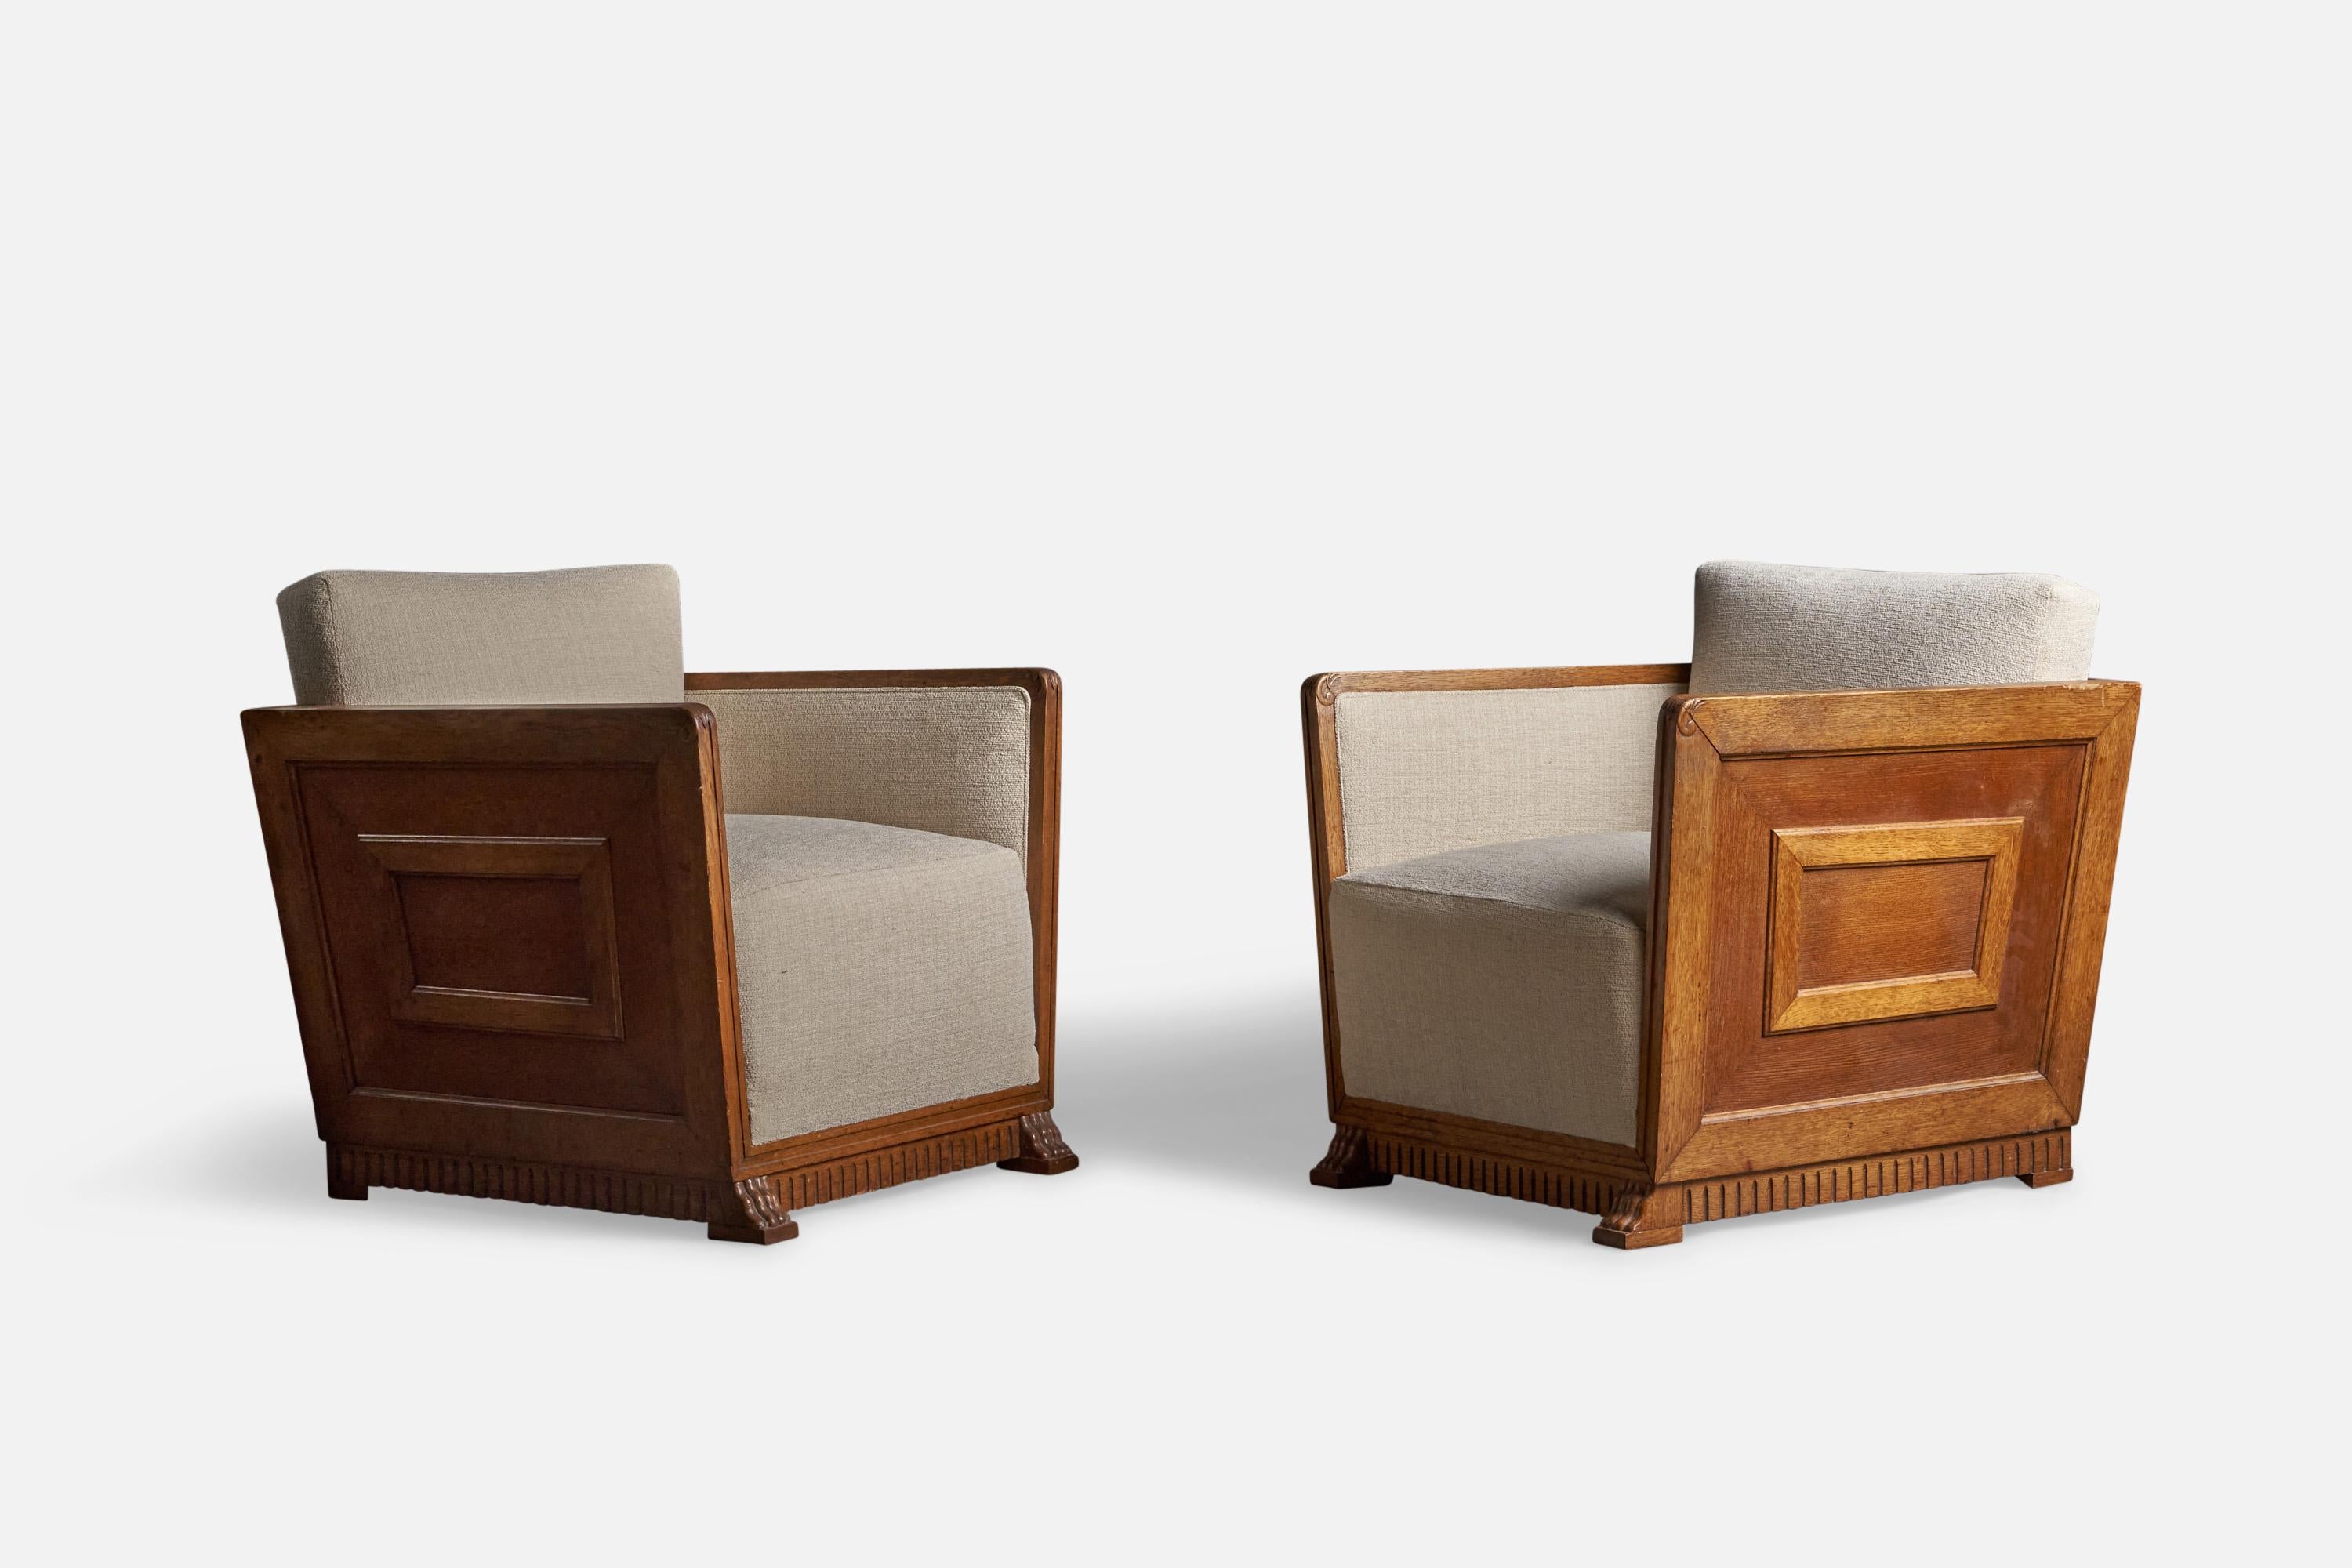 A pair of wood and off white fabric lounge chairs with carved ornamentation, designed and produced in Sweden, 1930s.